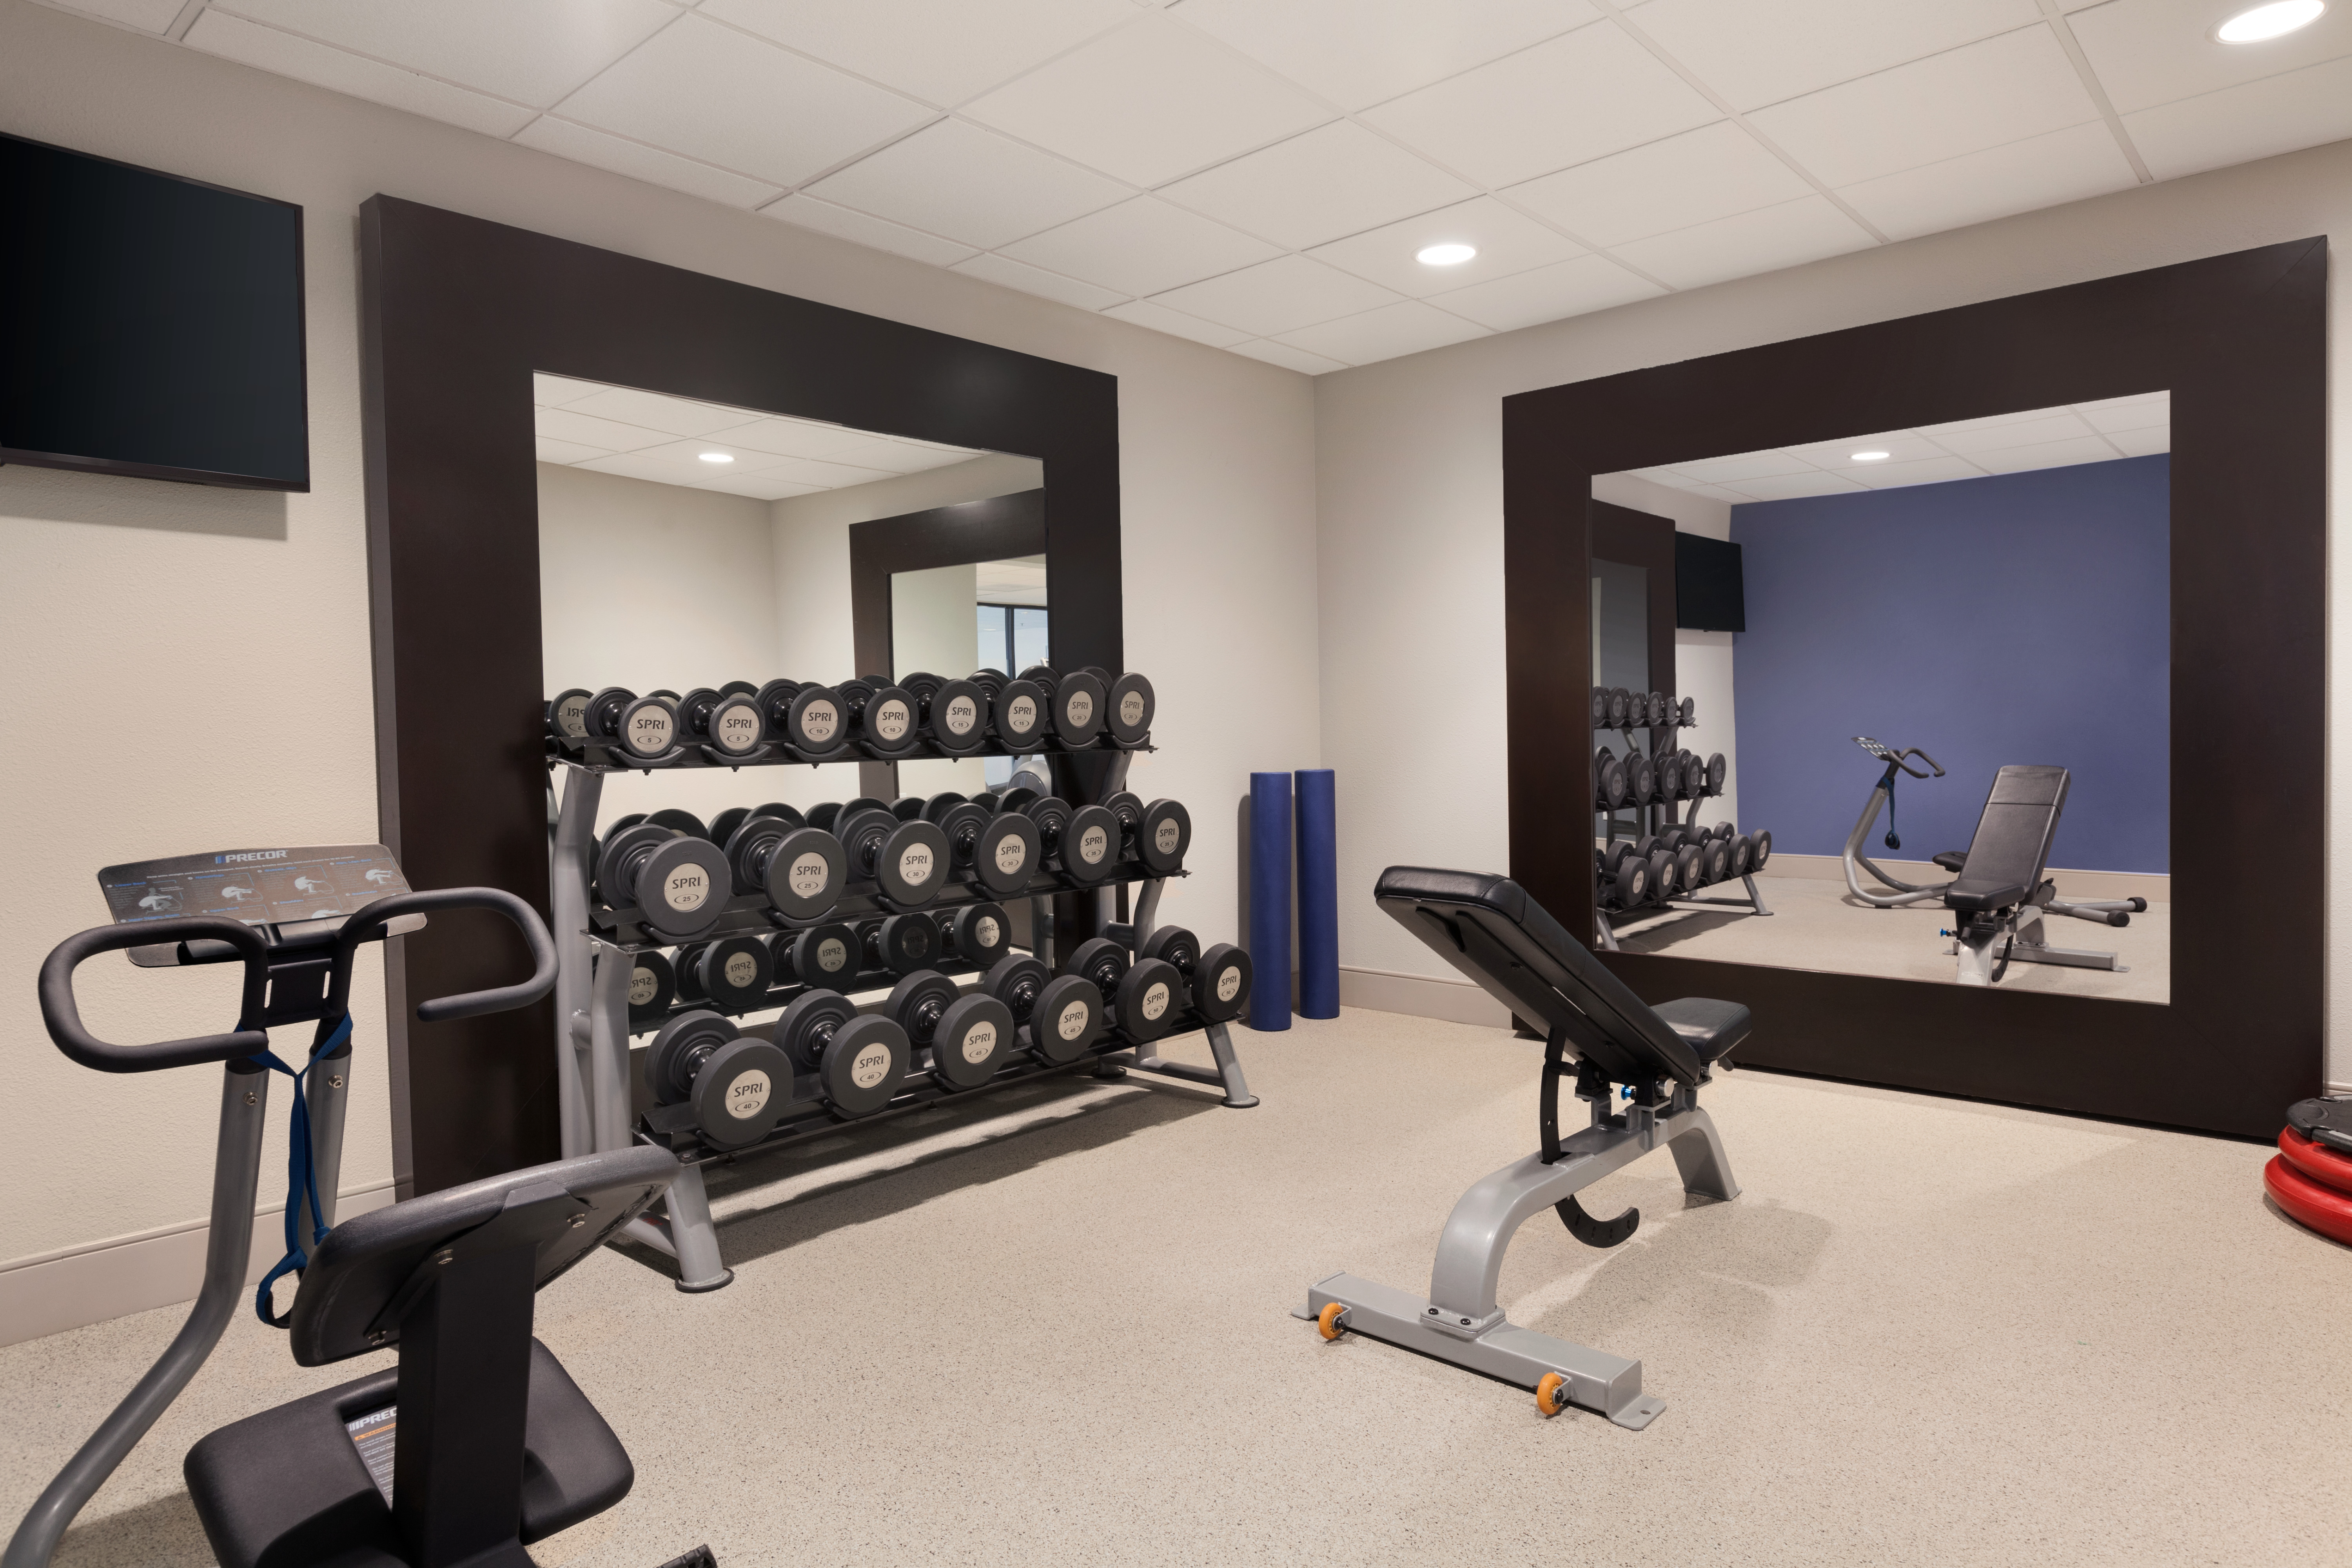 Fitness Center Machines and Weights Rack